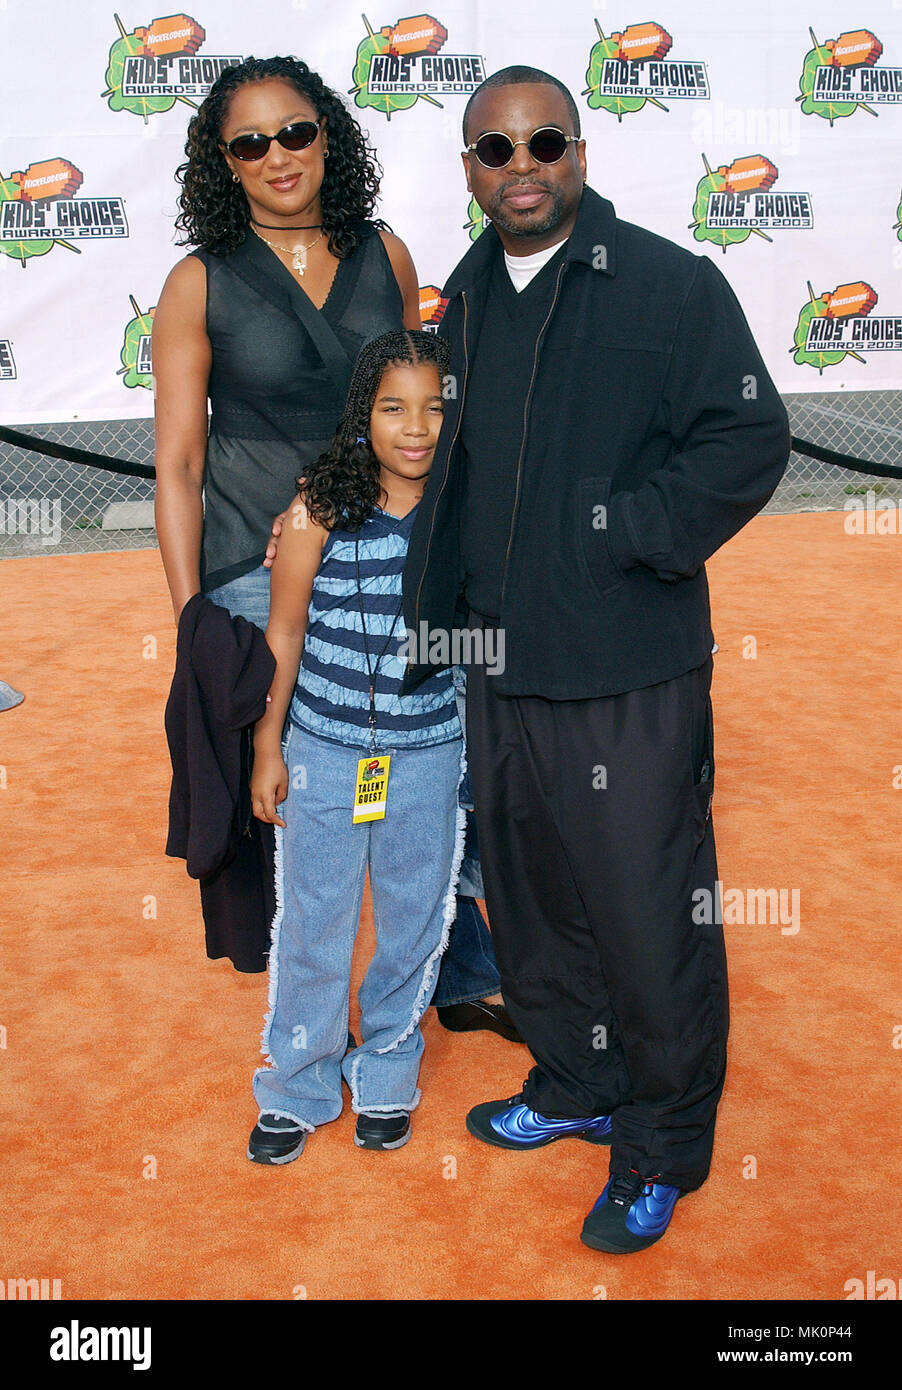 Levar Burton (Star Trek) with wife and daughter arriving at the  Nickelodeon's 16th Annual Kids Choice Awards at the Barker Hanger In Santa  Monica, Los Angeles. April 12, 2003. - BurtonLevar family391.JPG -